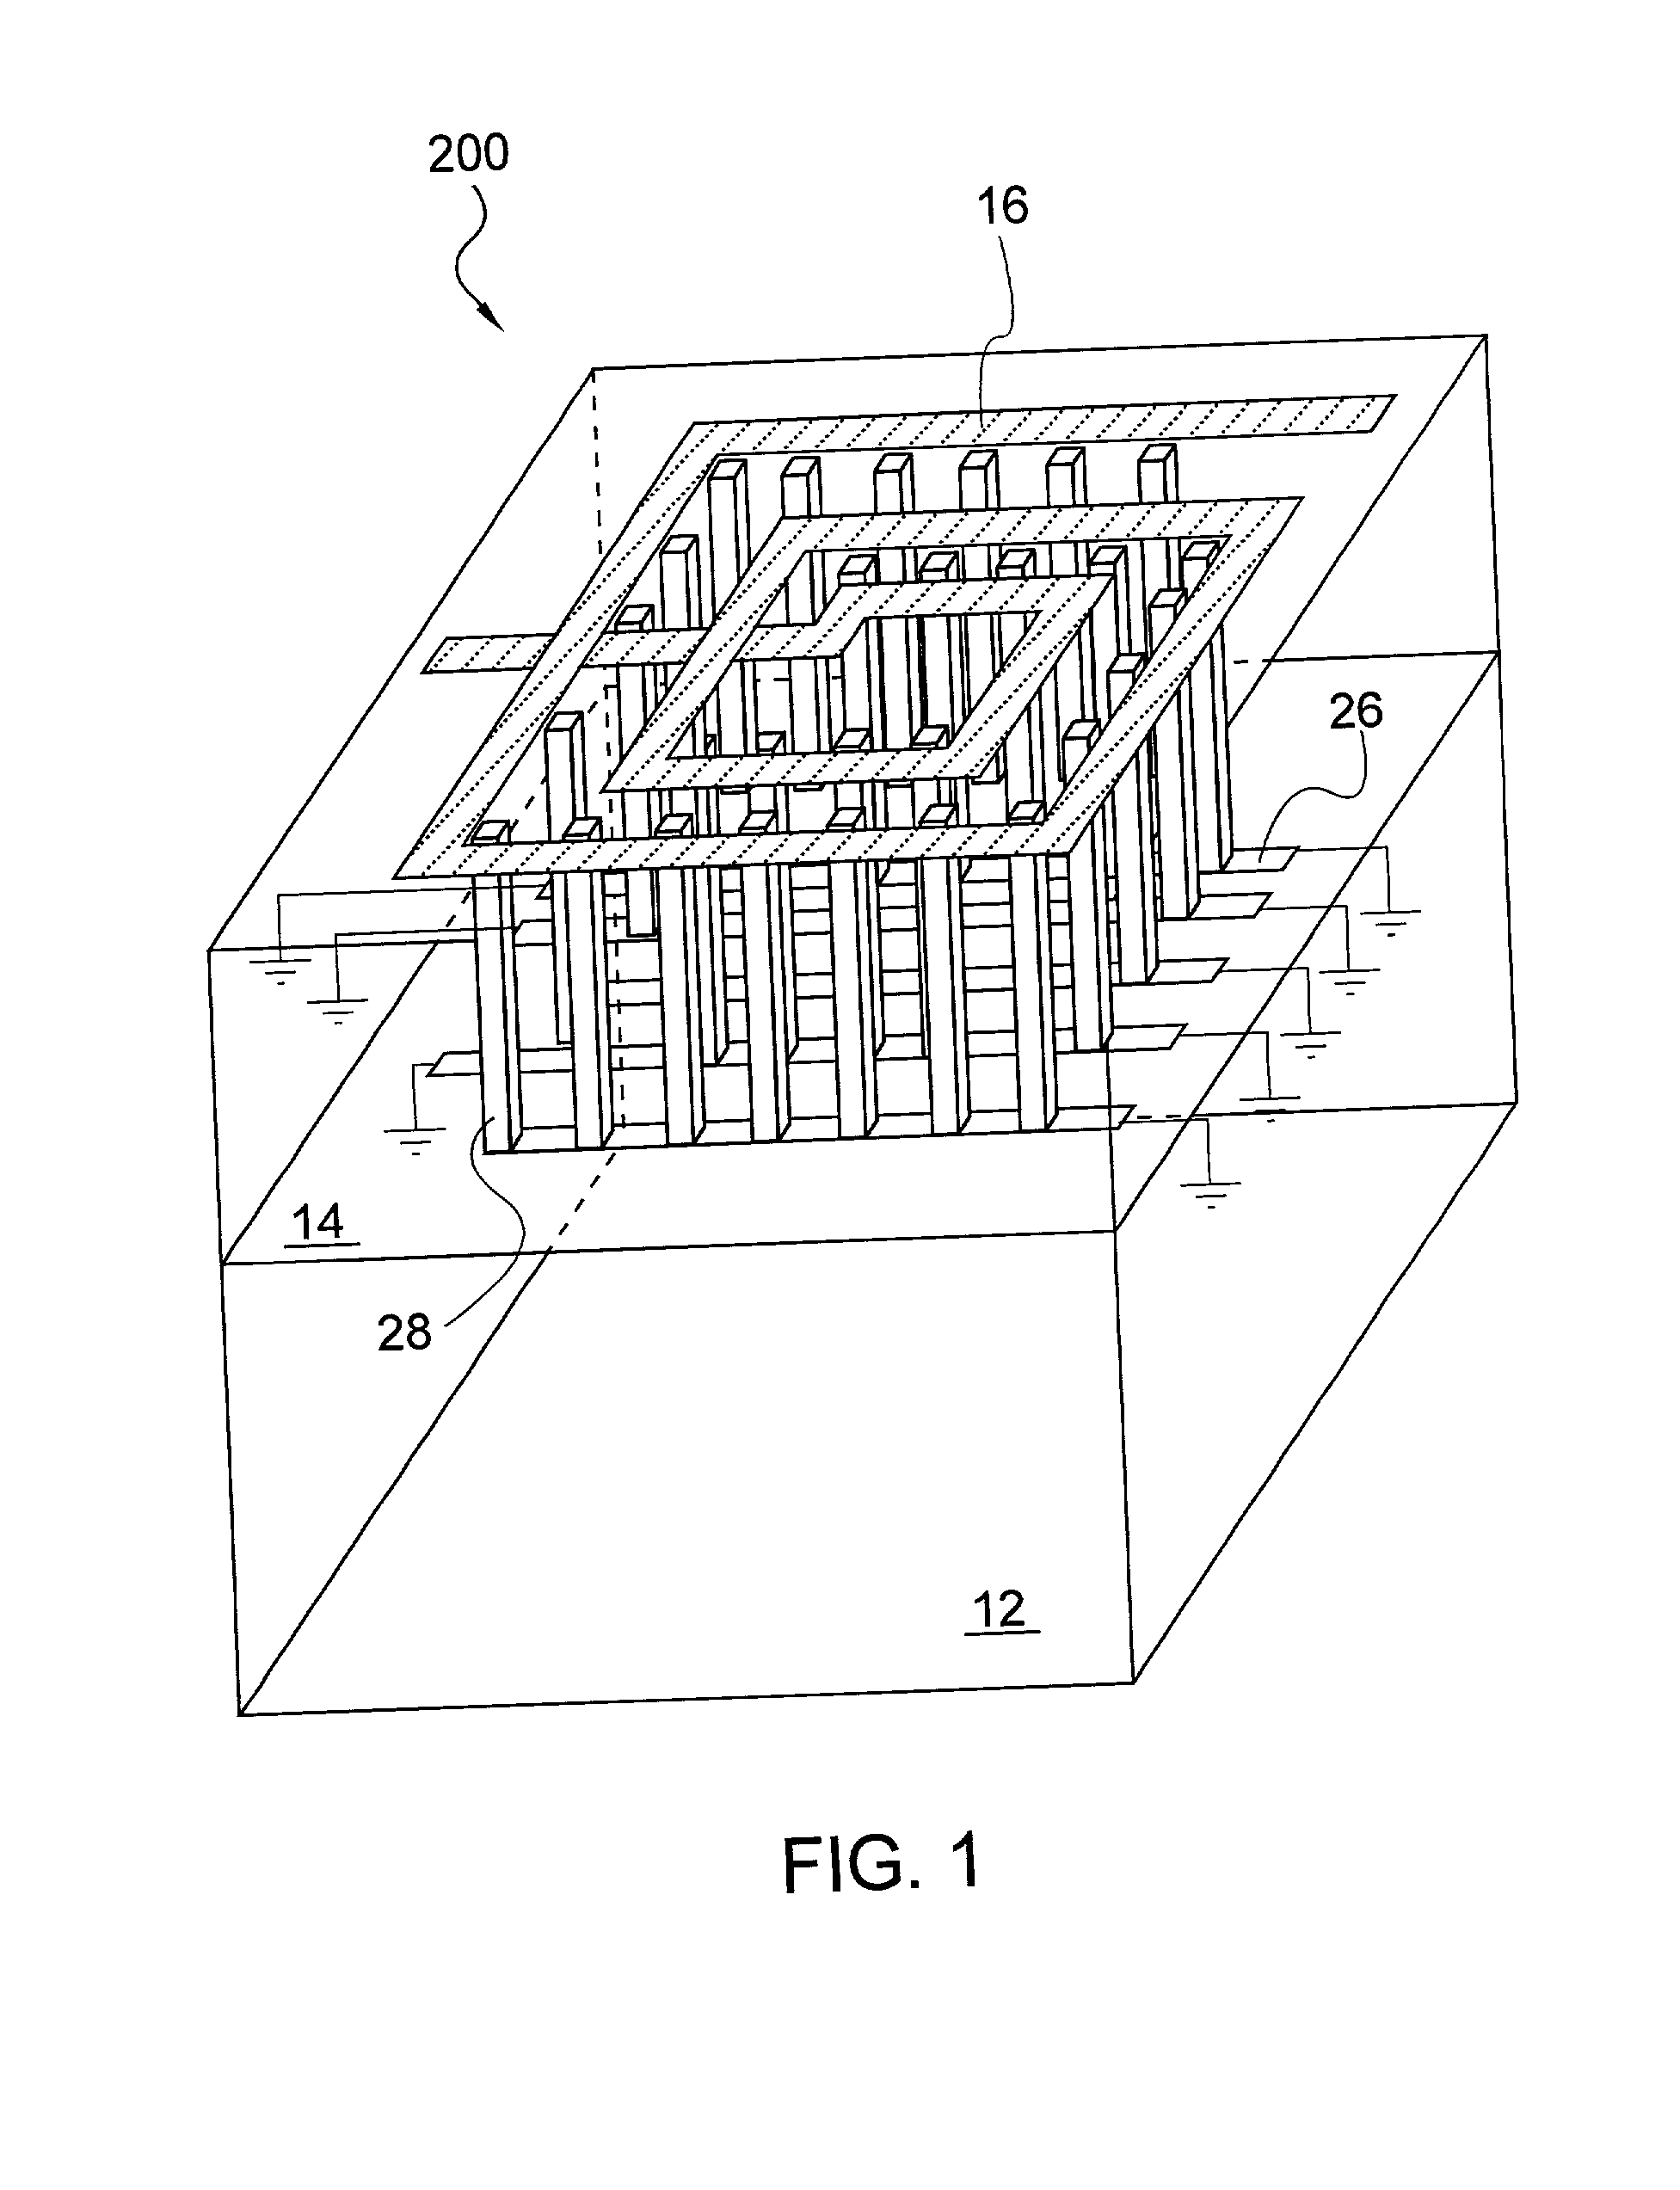 Spiral inductor semiconducting device with grounding strips and conducting vias